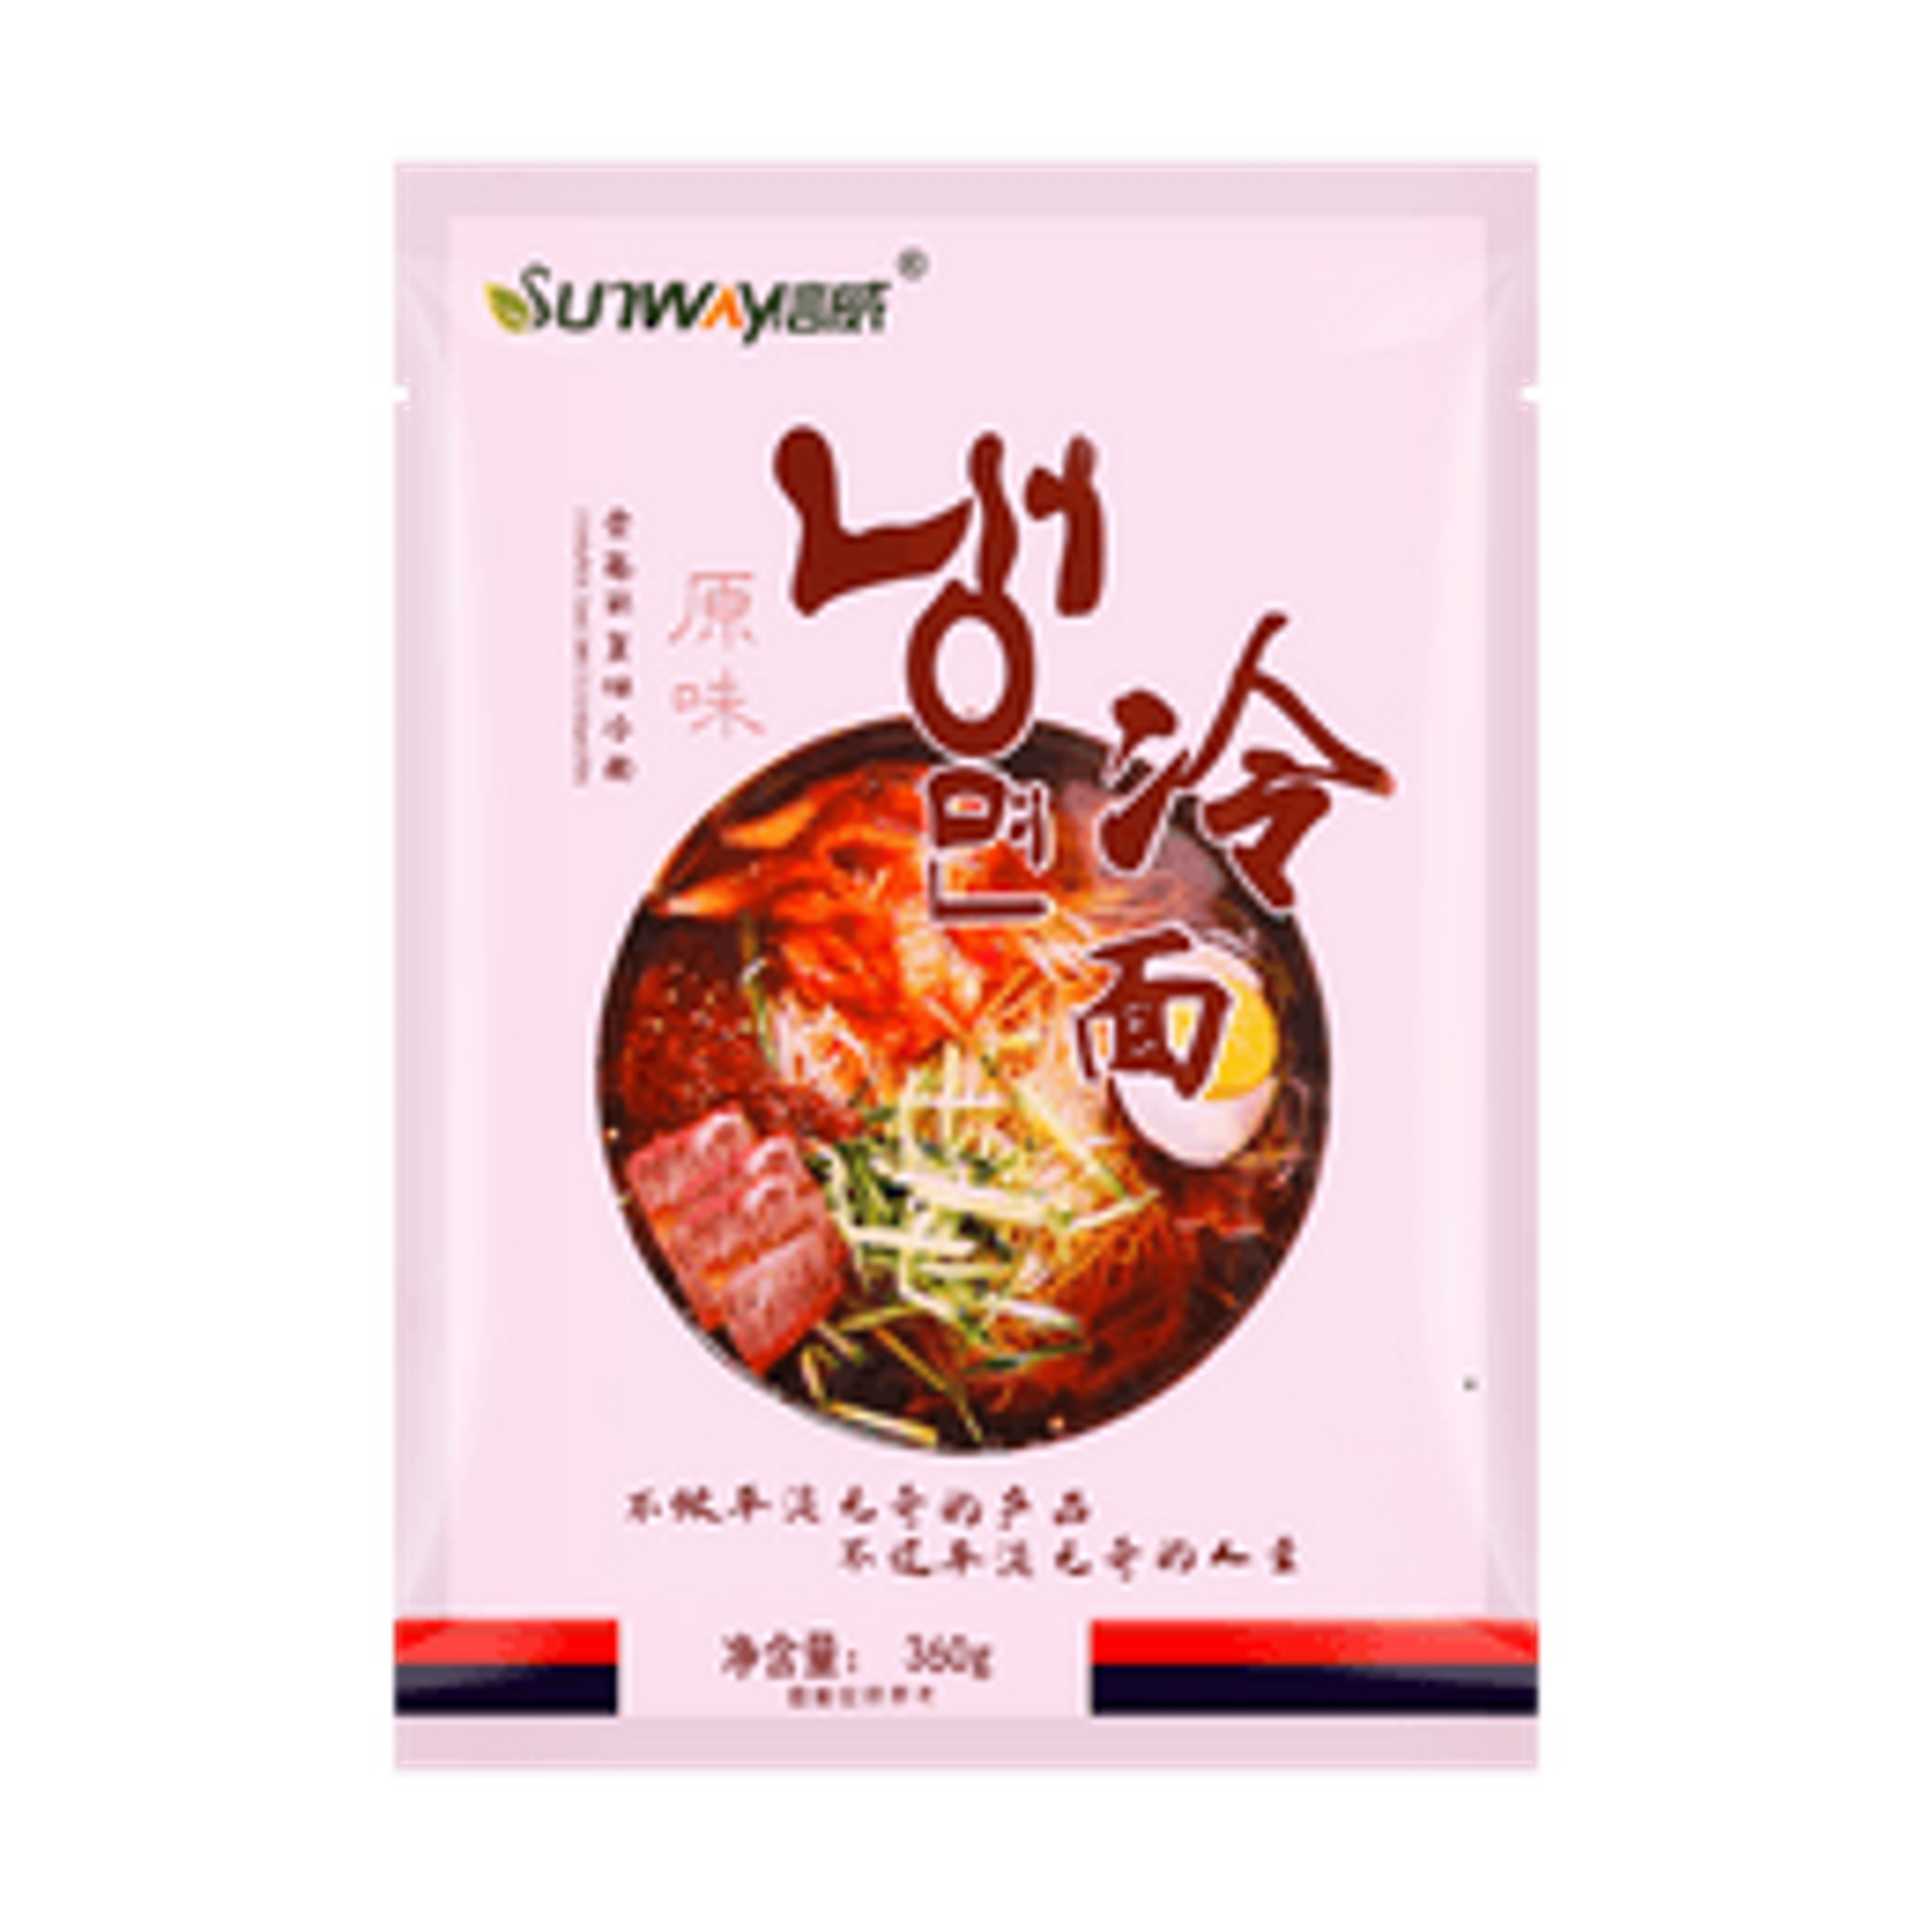 JINGAOLI Leng Mian Cold Noodles - Sweet and Sour Korean-Style Soup with Spicy Oil, 12.69oz | Yami